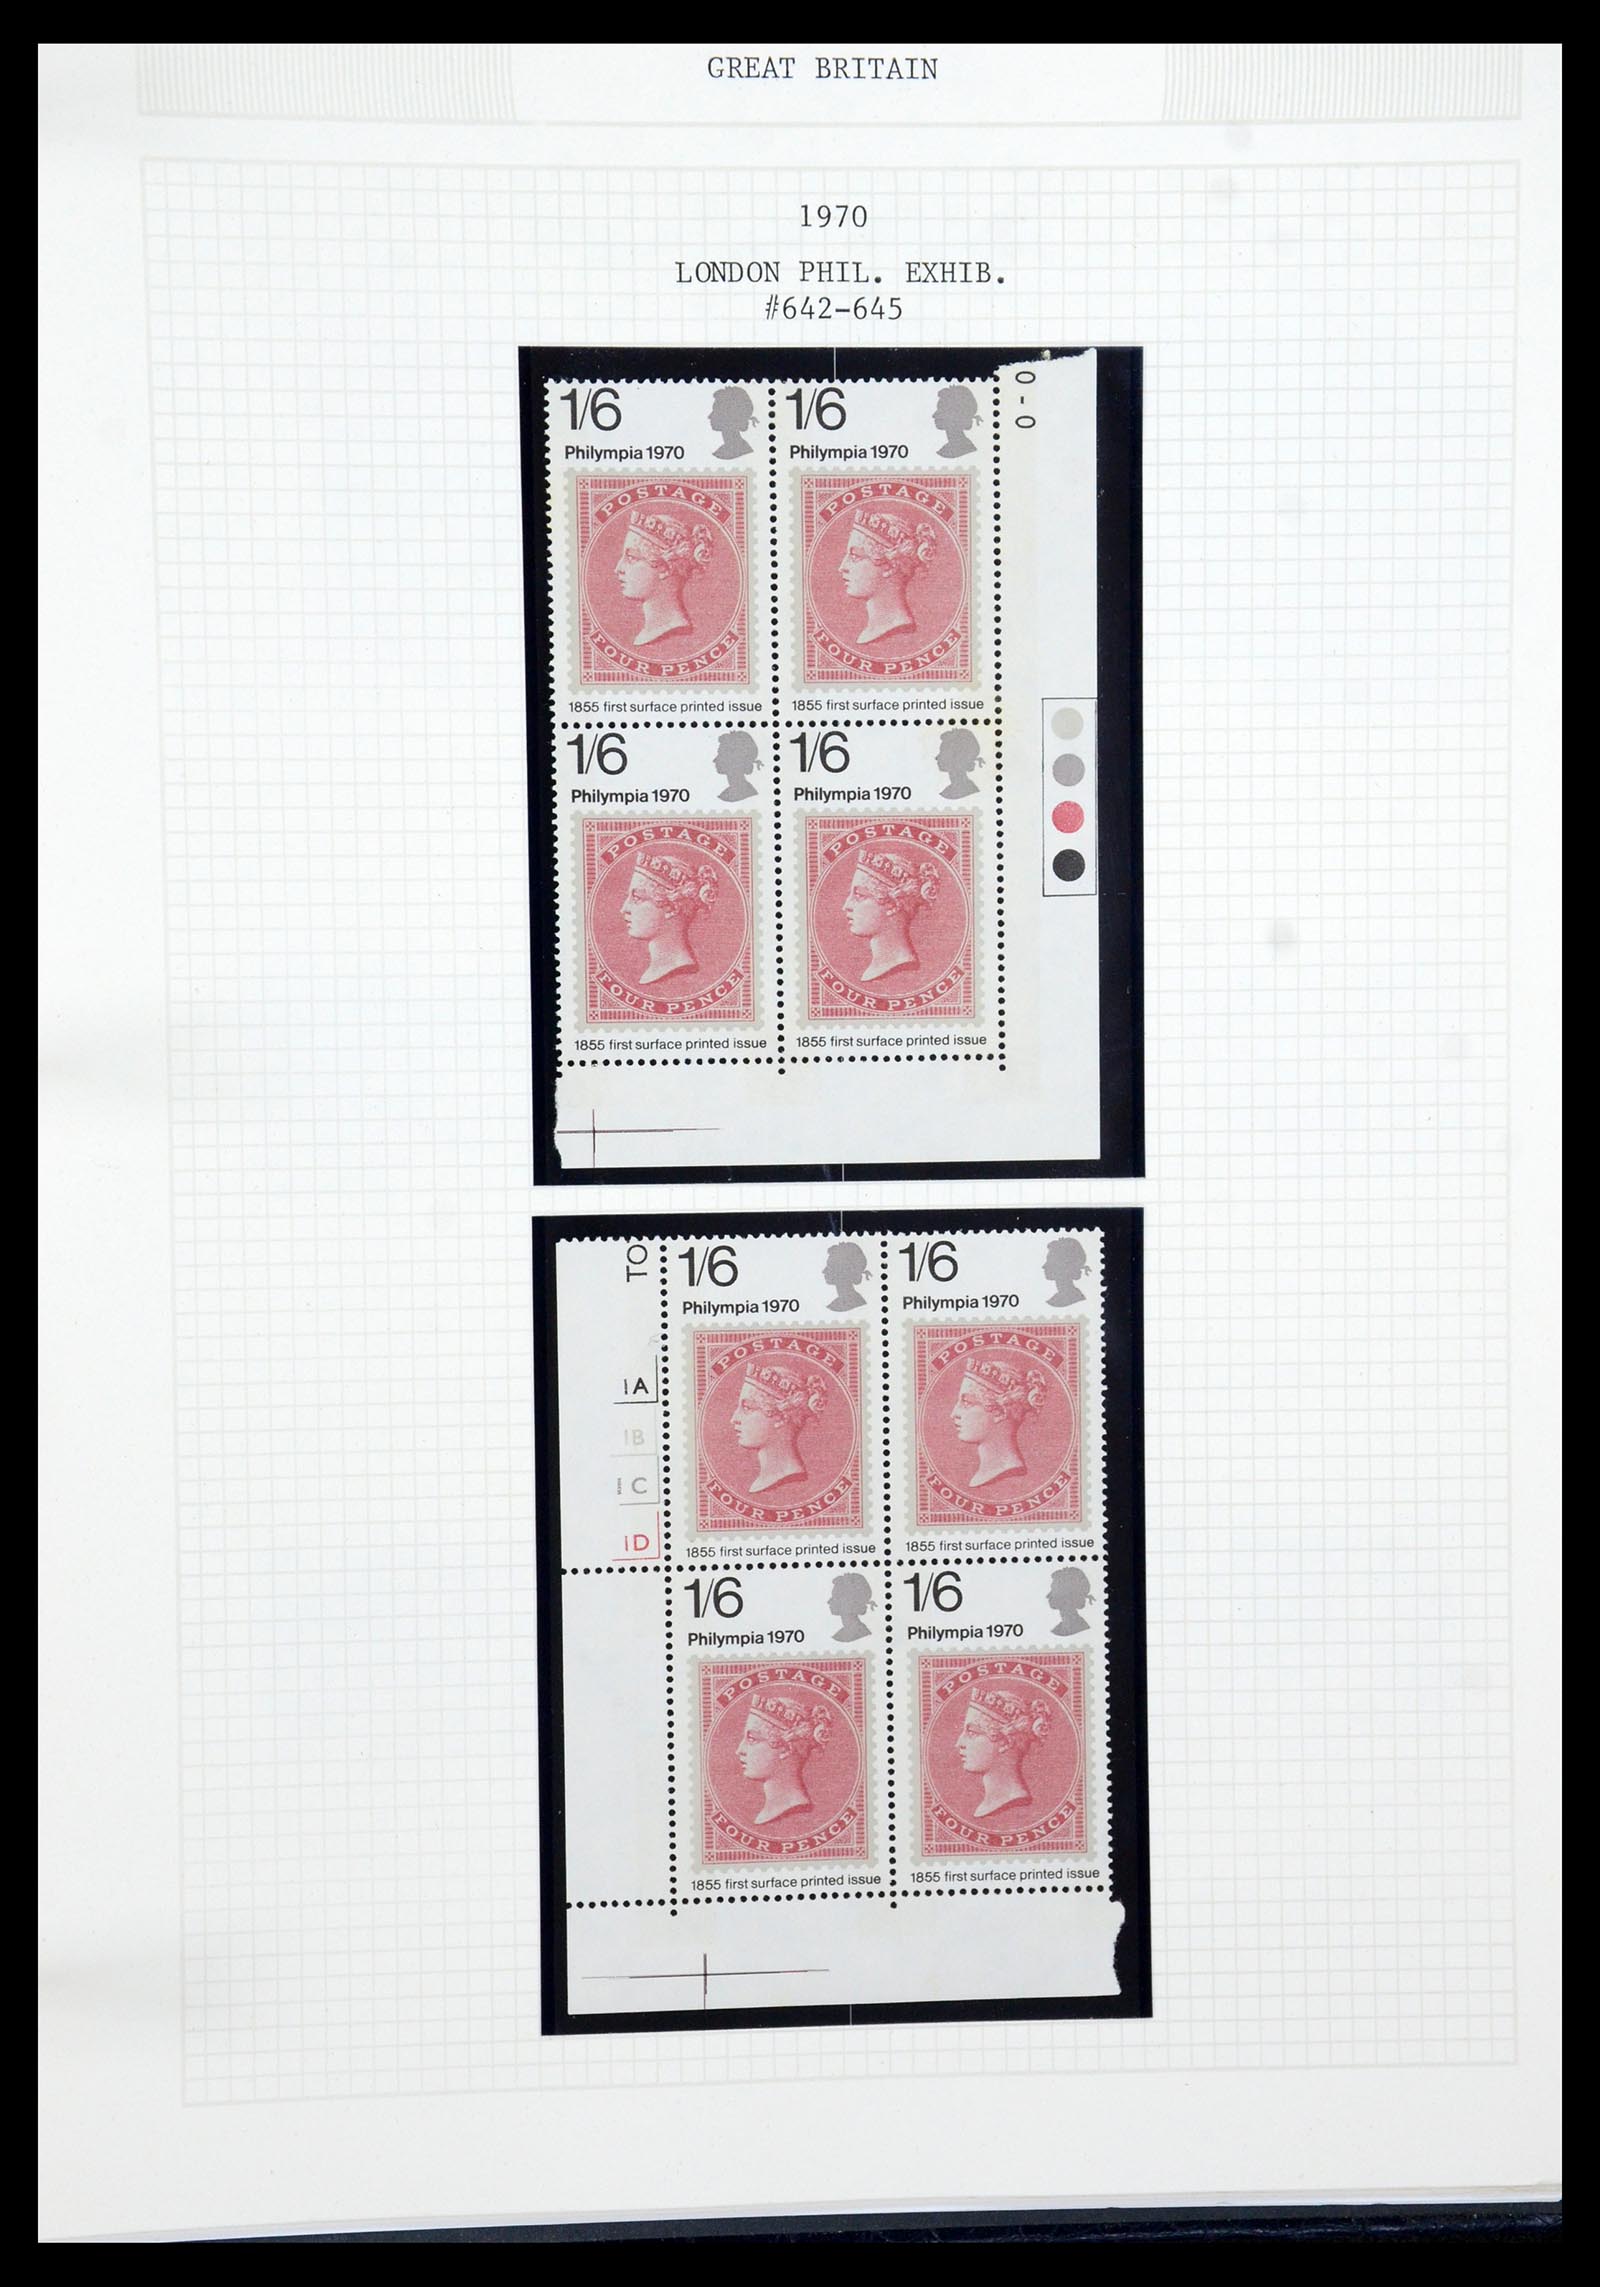 36308 092 - Stamp collection 36308 Great Britain 1935-2003.